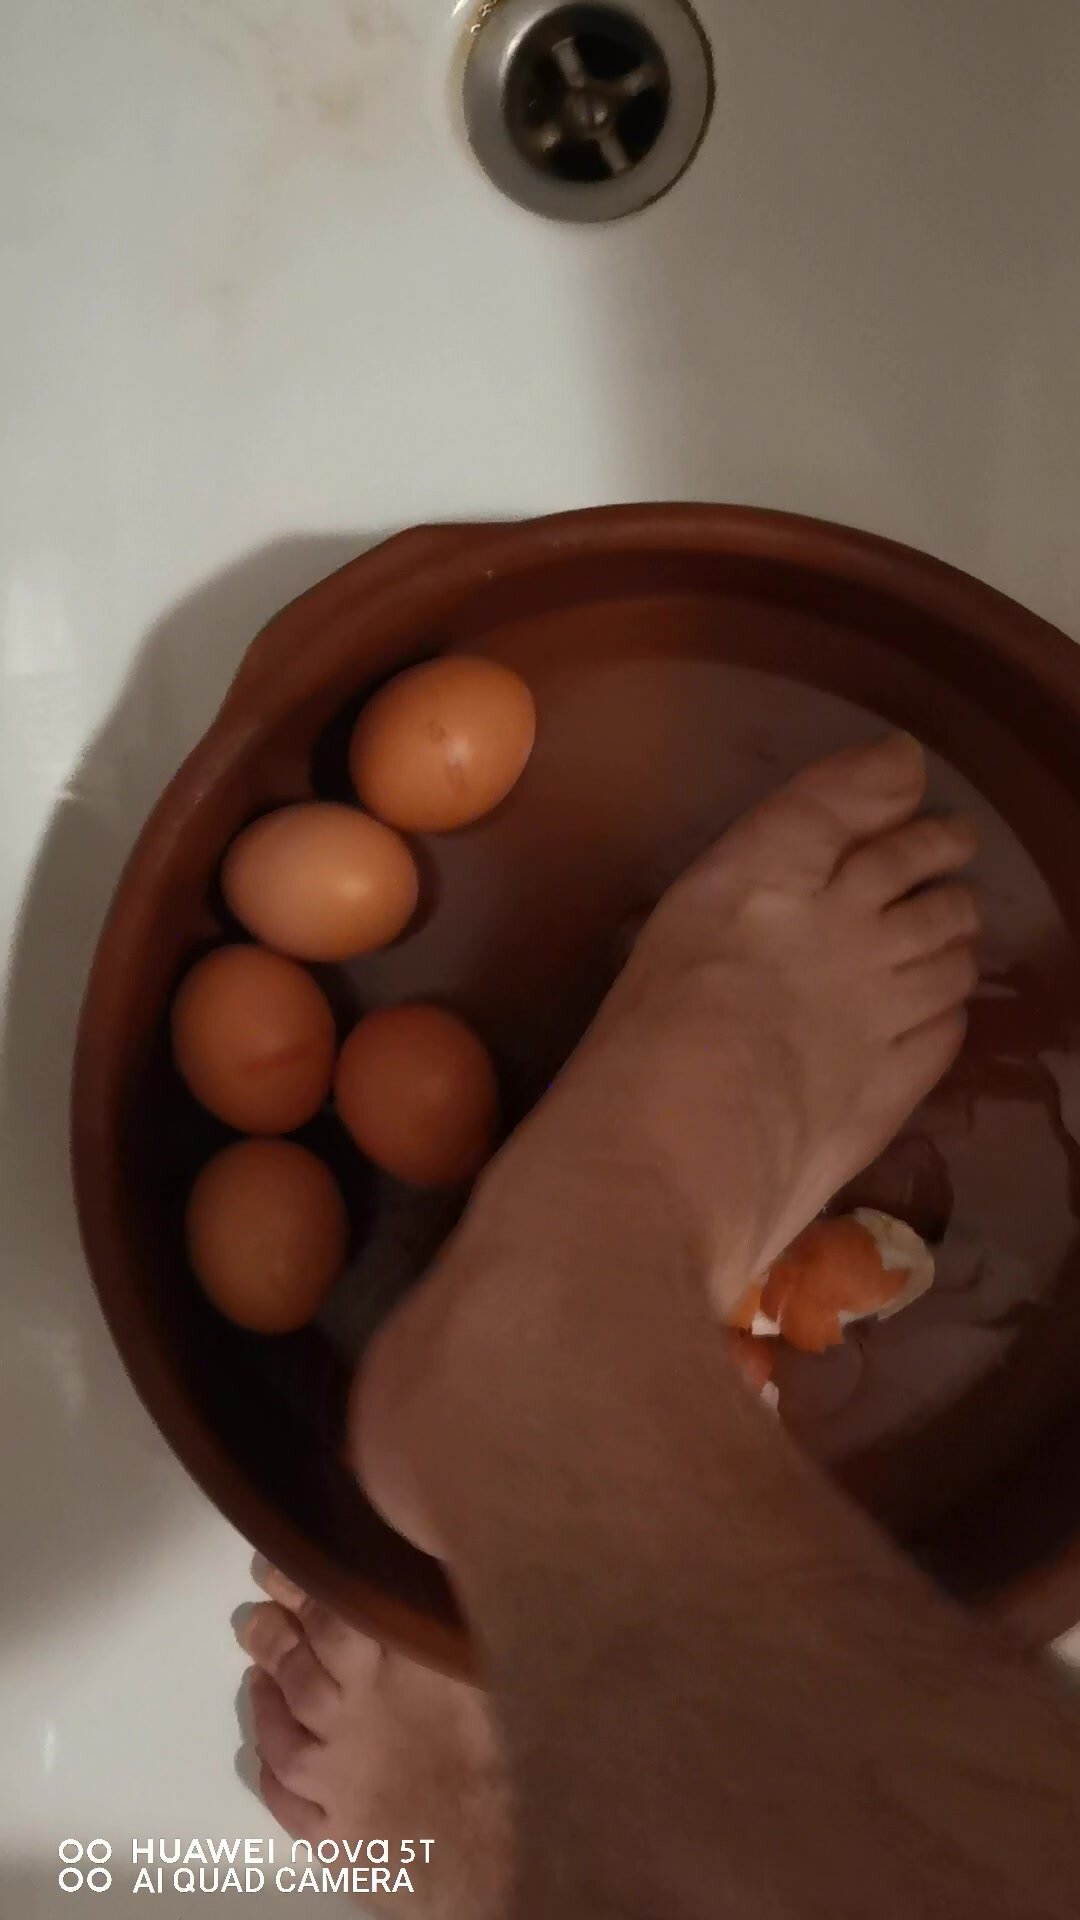 cracking eggs with the feet